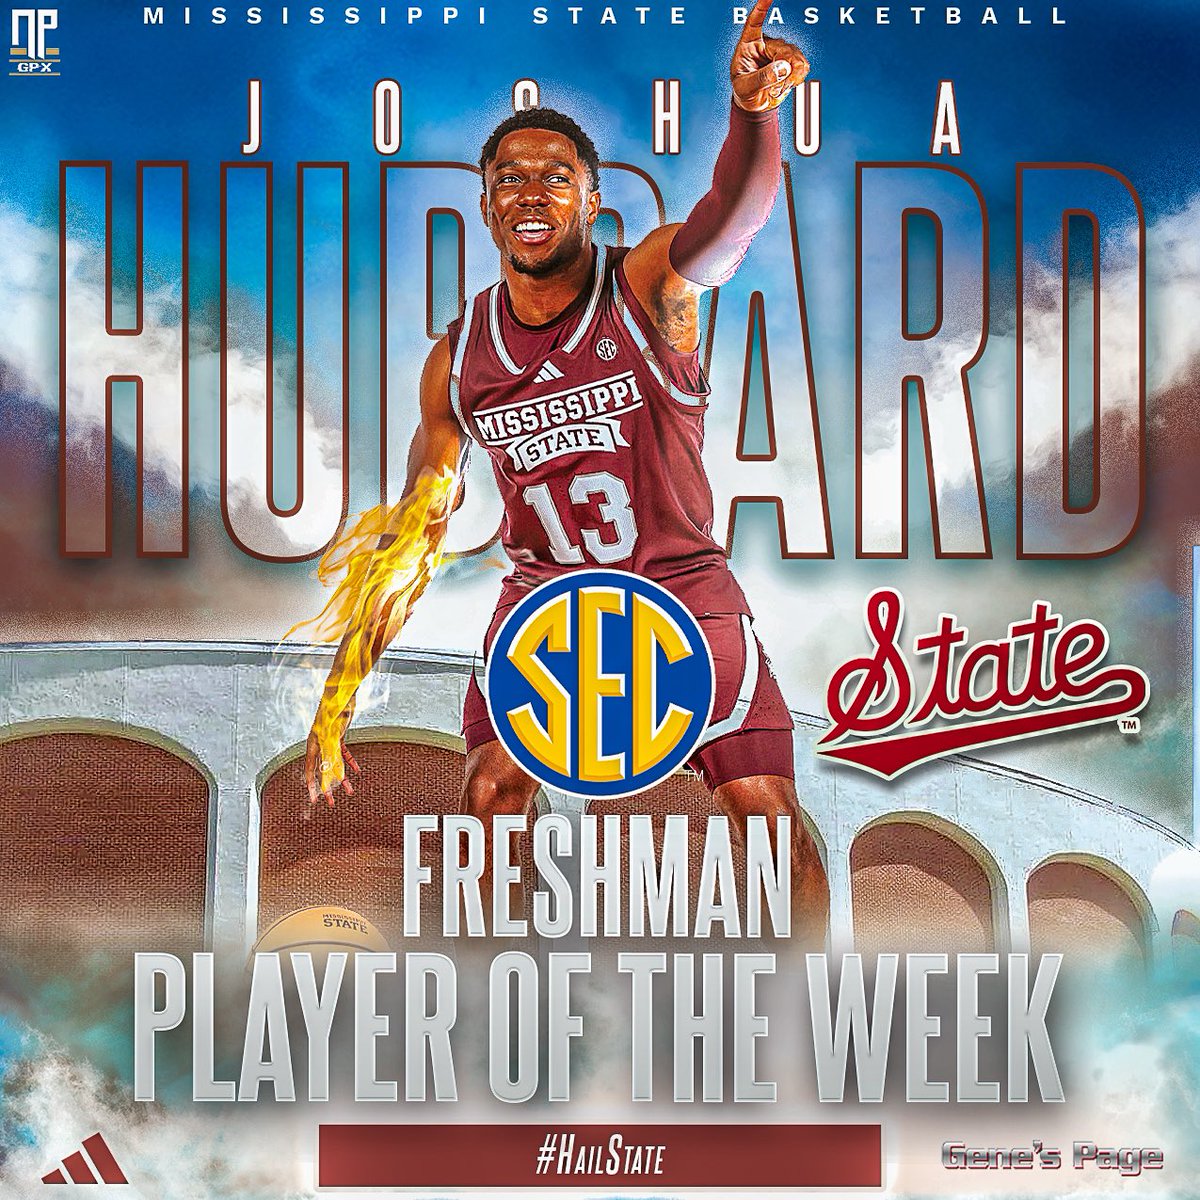 Don’t let Josh get hot! 🔥🔥🔥 Josh Hubbard (@jhubb_3) is your THREE TIME @SEC Player of the Week! #HailState 🐶